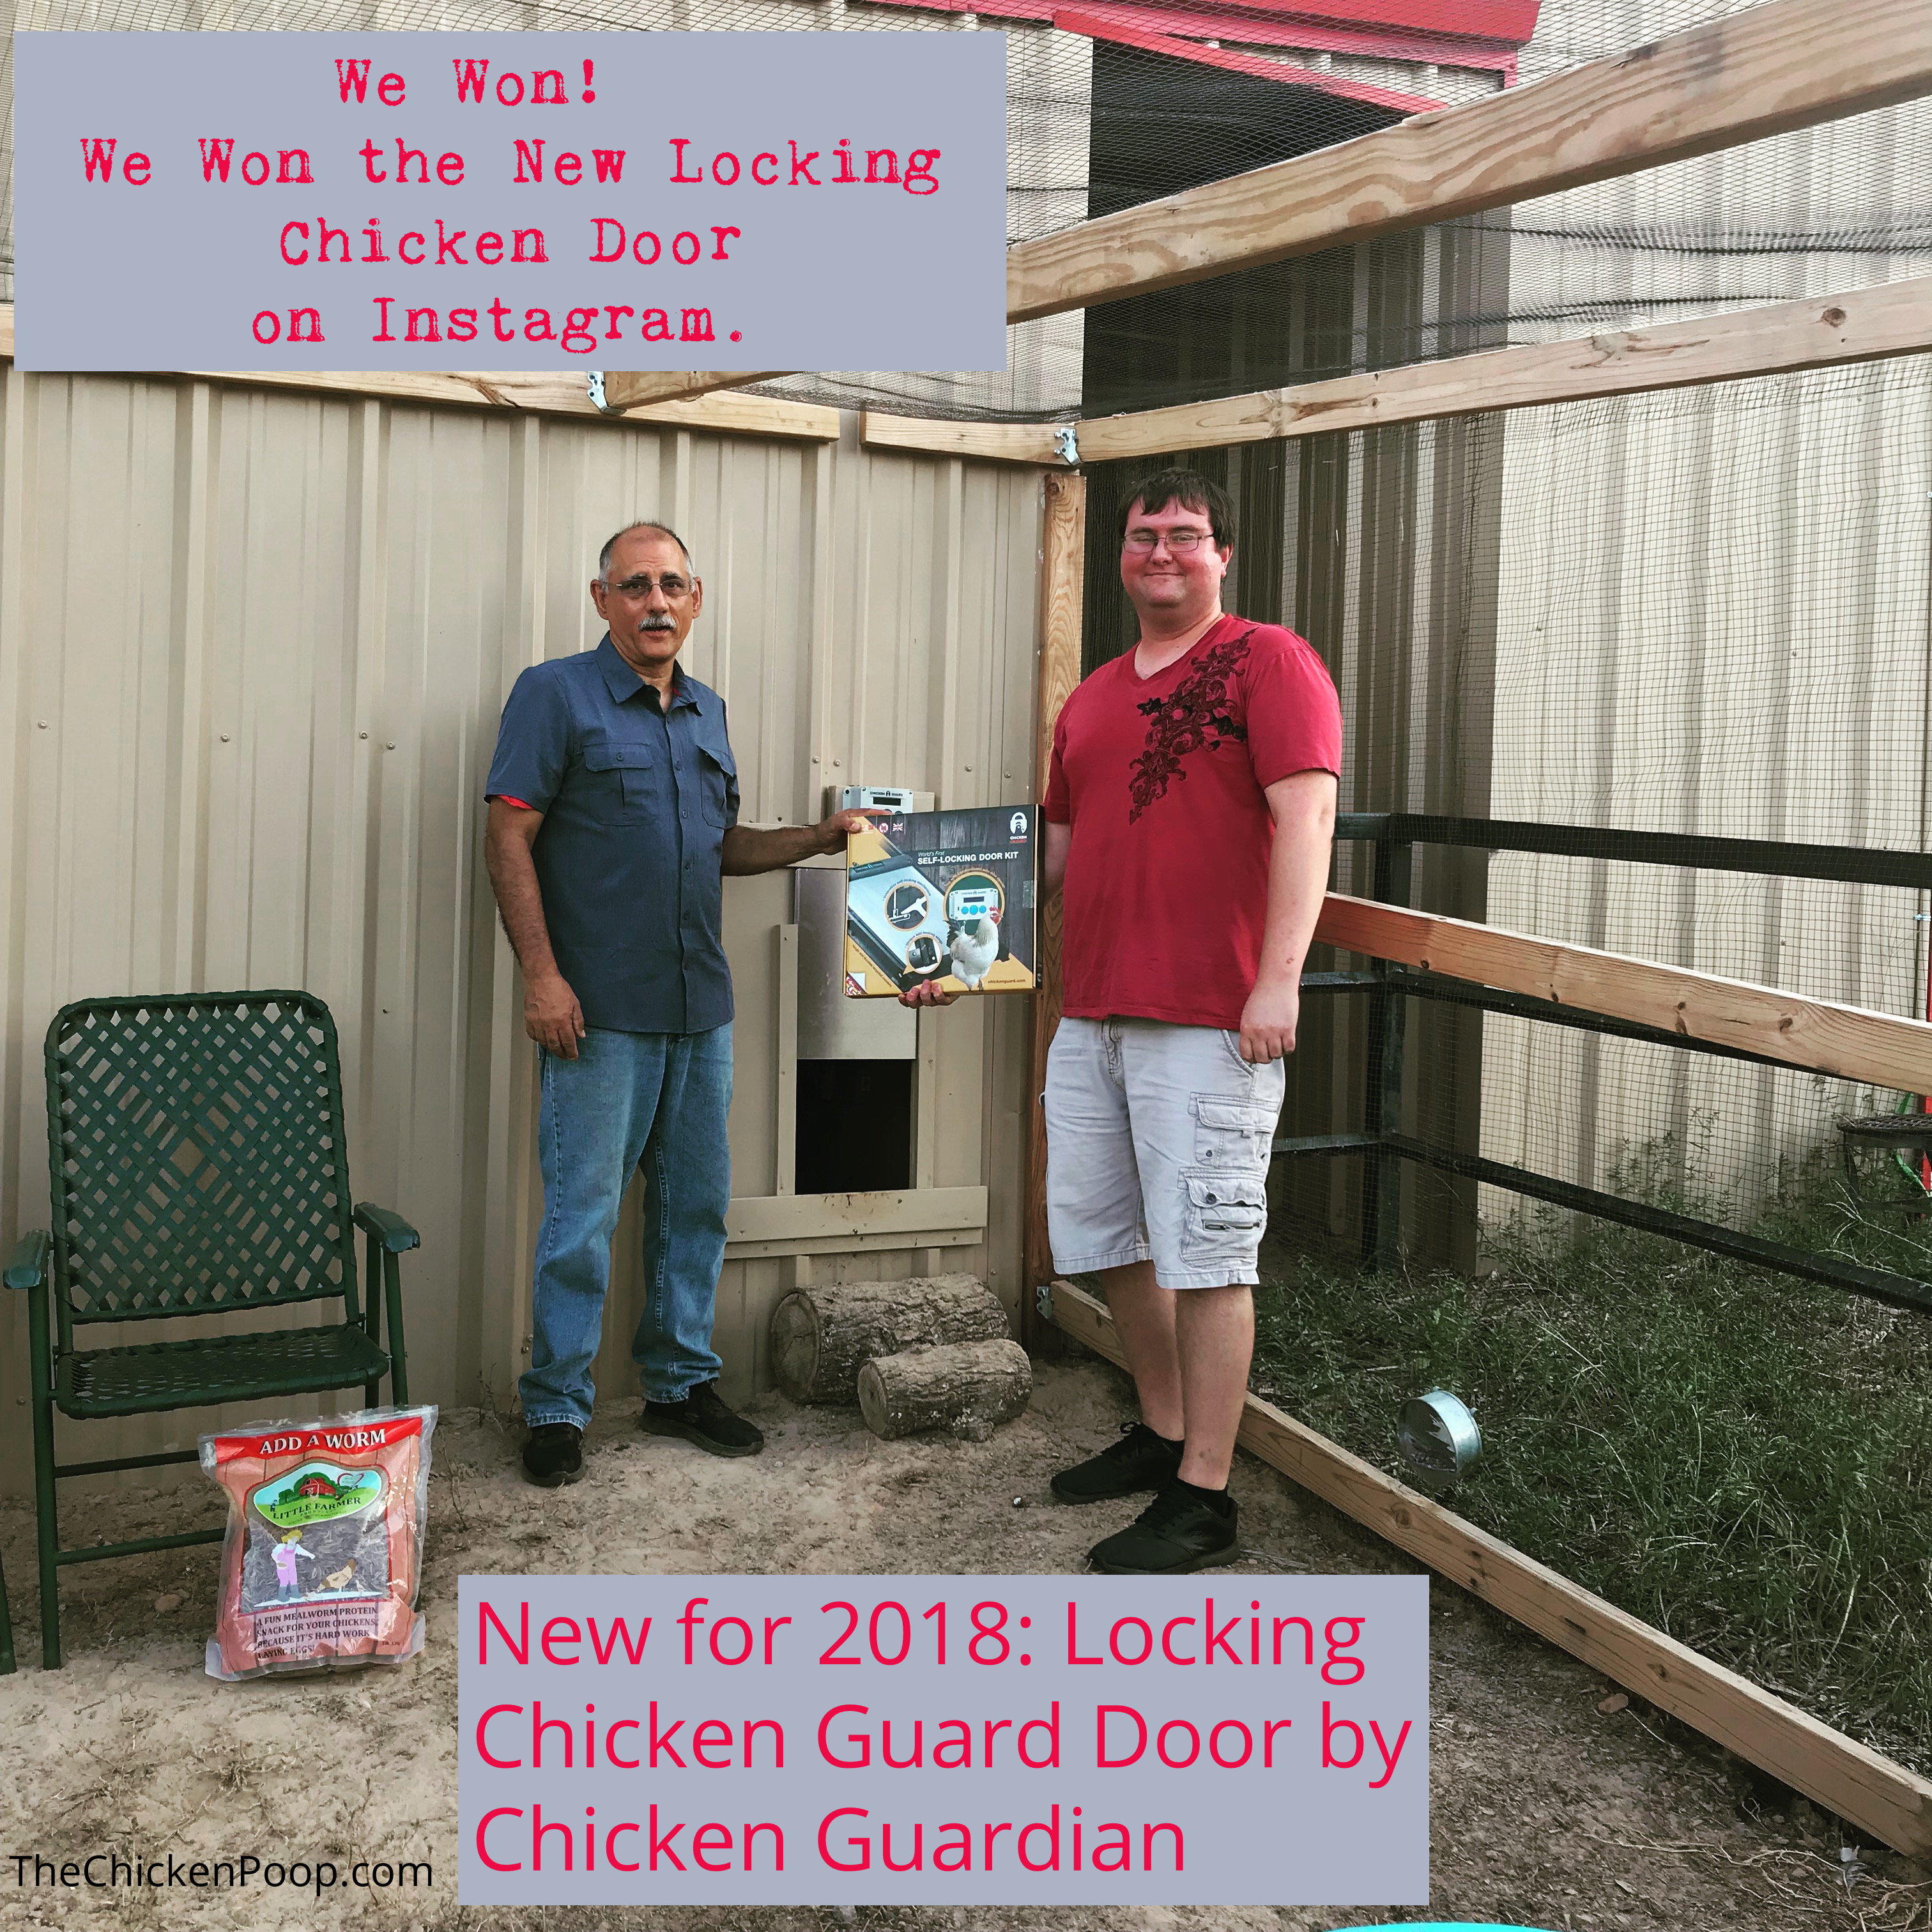 Chicken Guardian personally delivered our prize and set down to visit with us on camera.